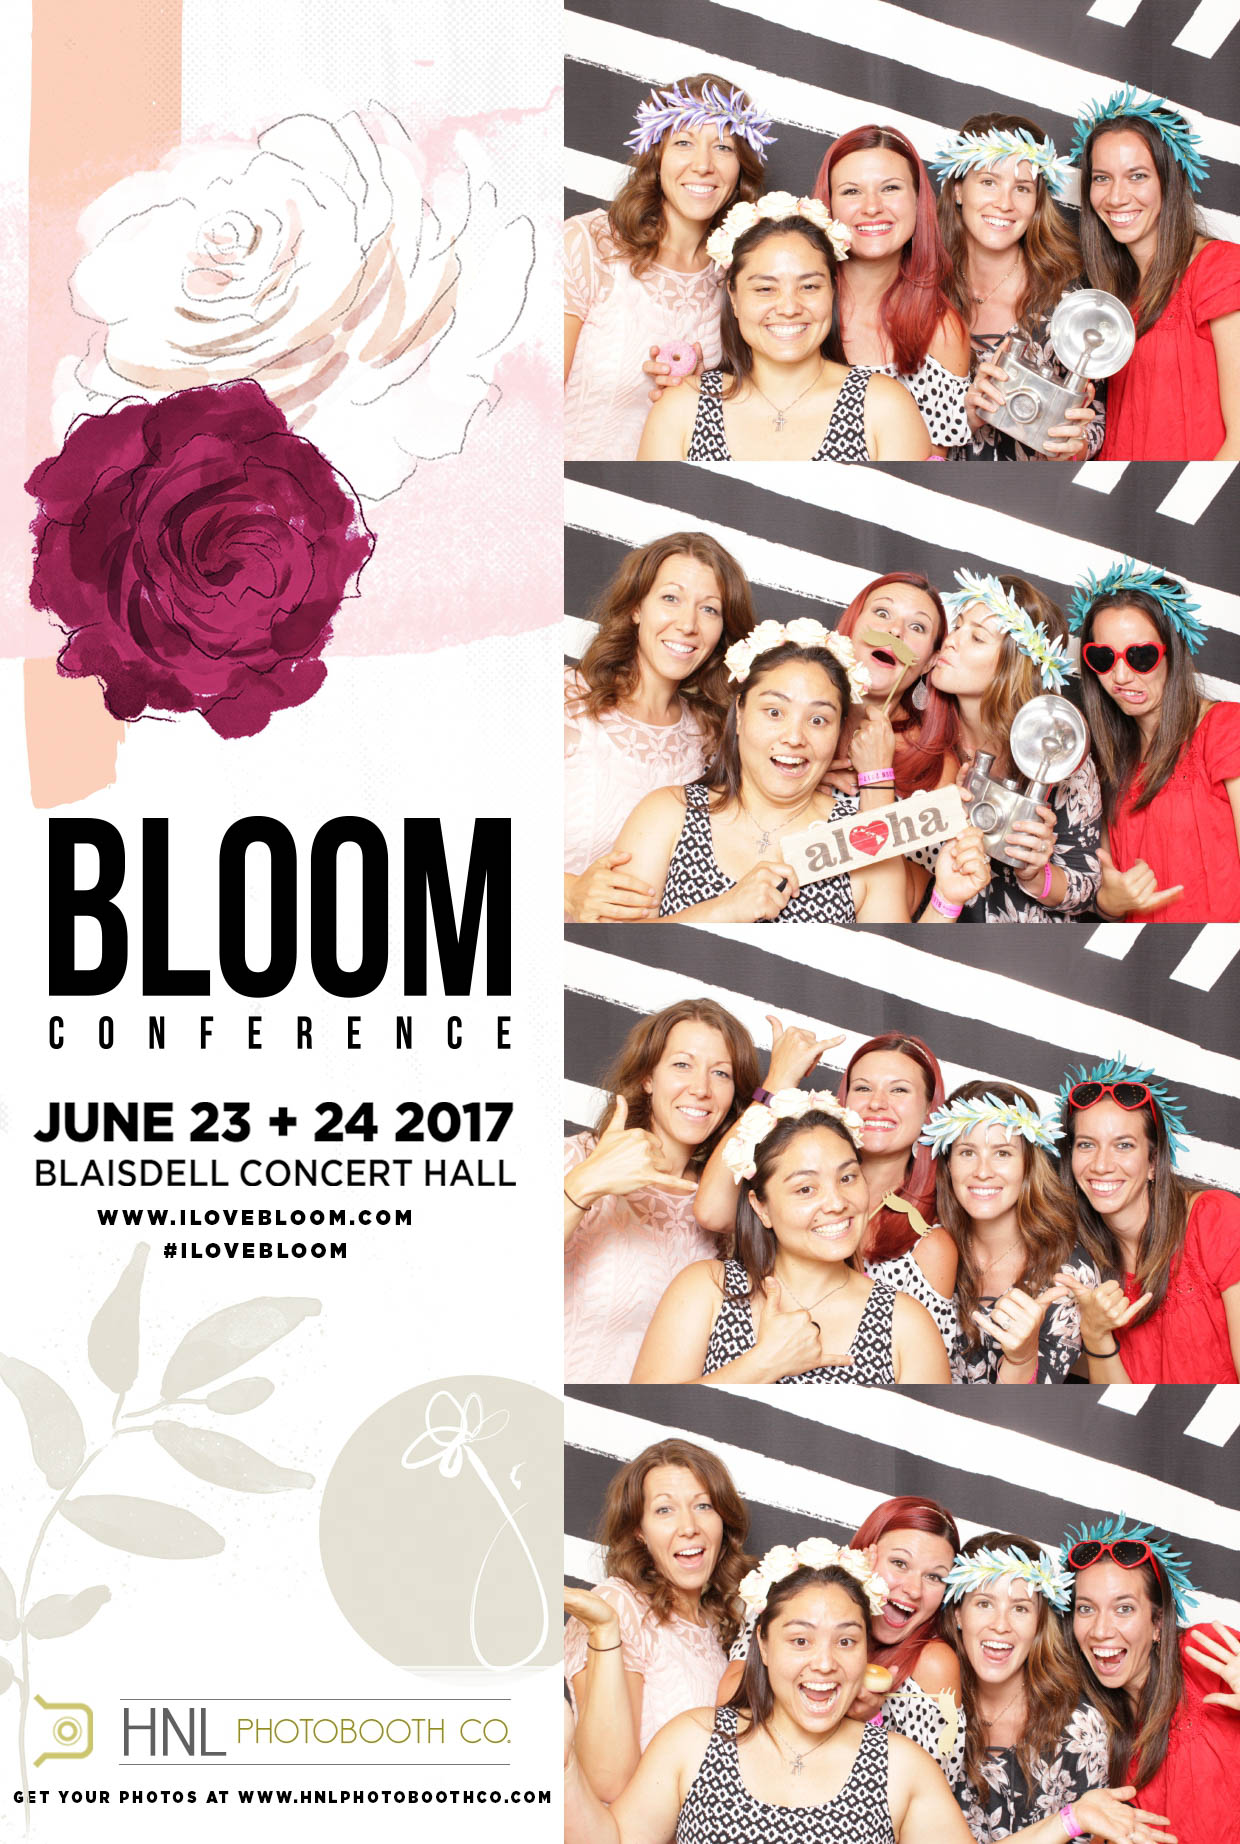 Bloom Conference Blaisdell Concert Hall Oahu Hawaii Photo Booth NEW-30.jpg